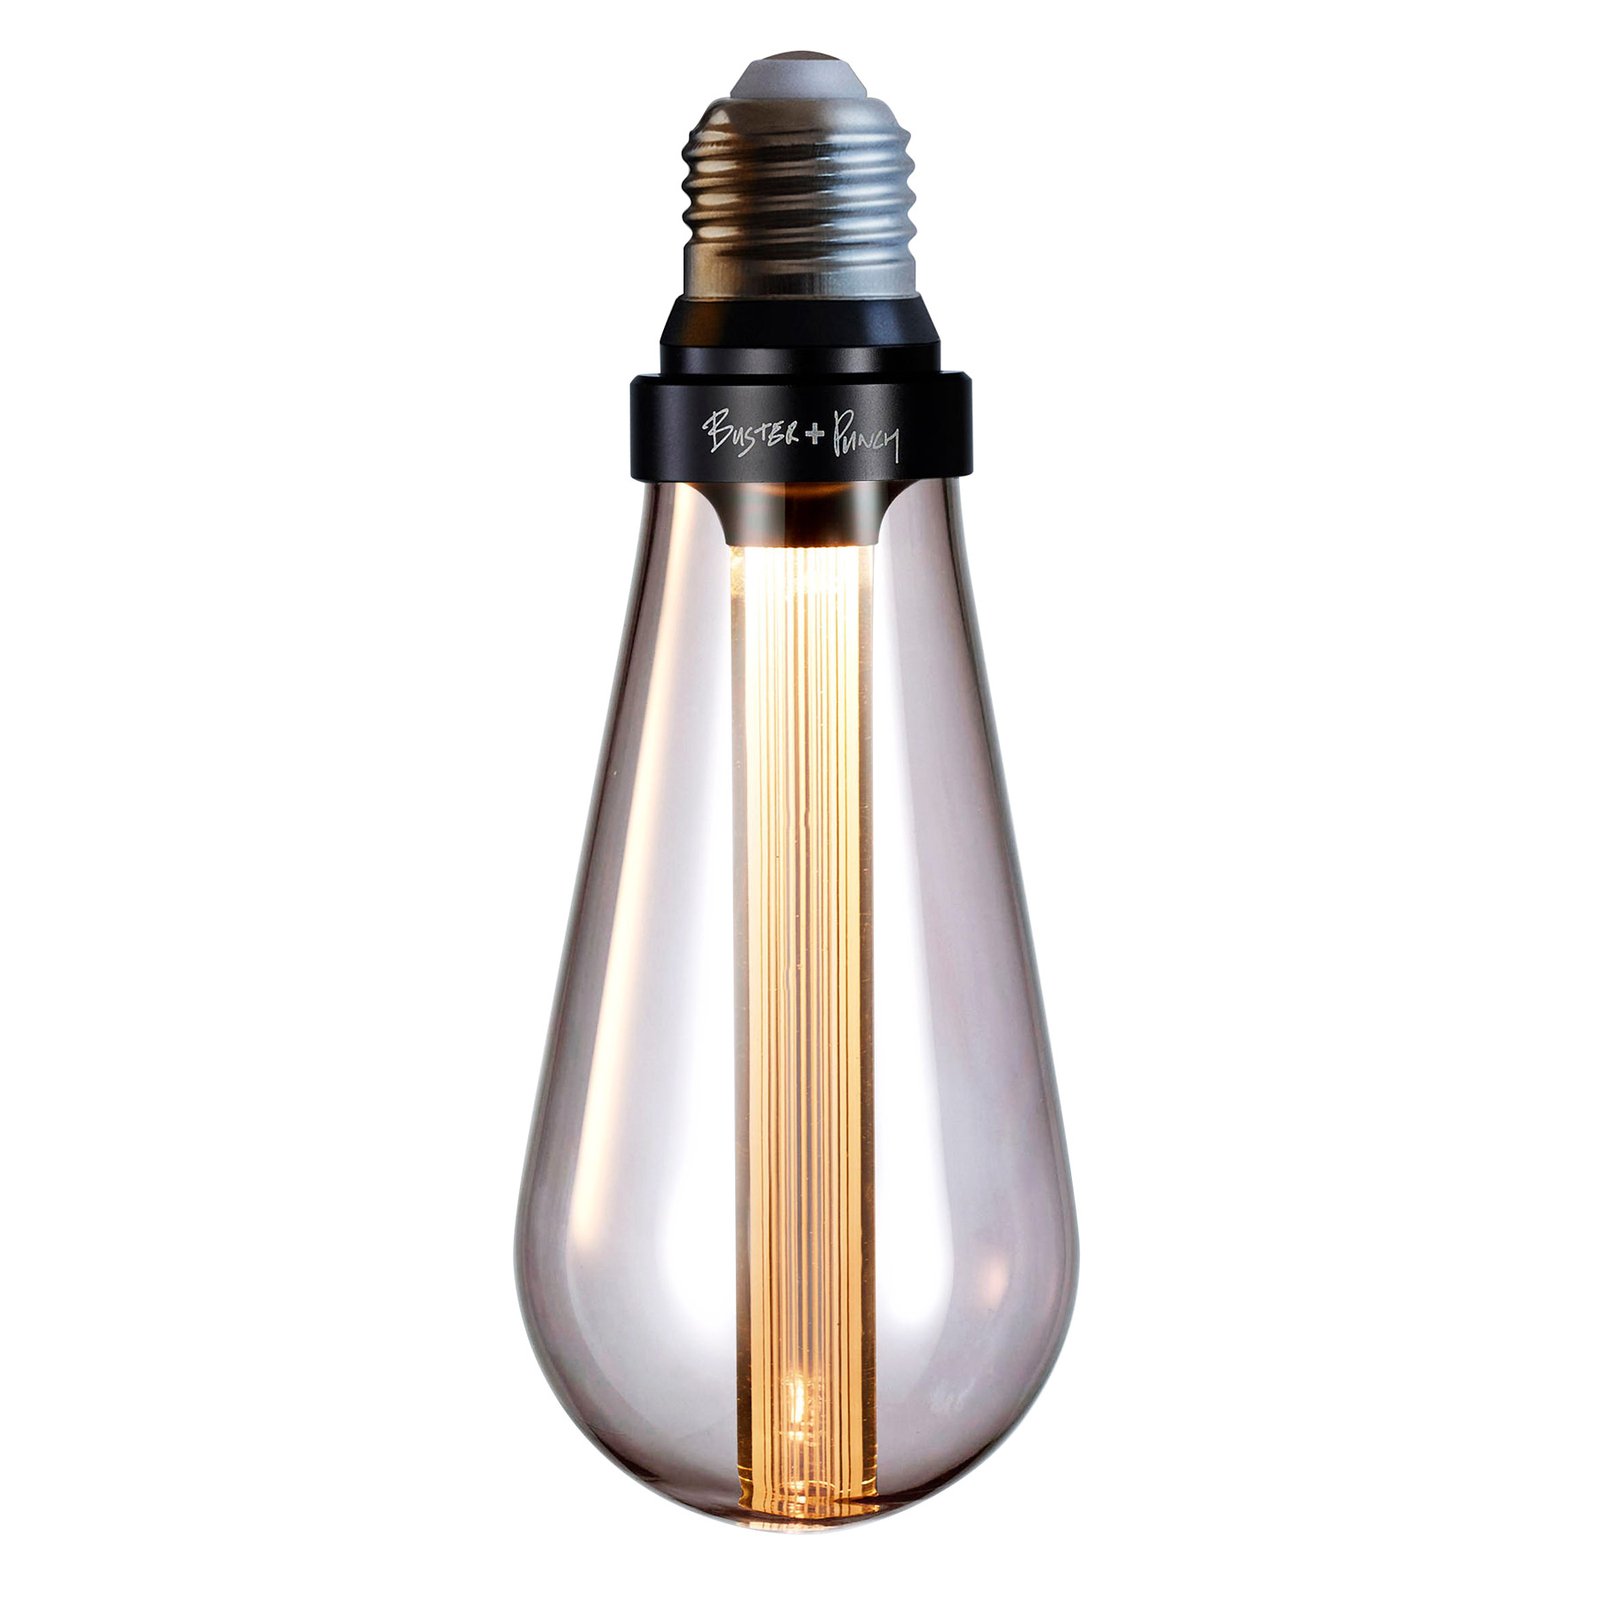 Buster + Punch LED-Lampe E27 2W dimmbar smoked